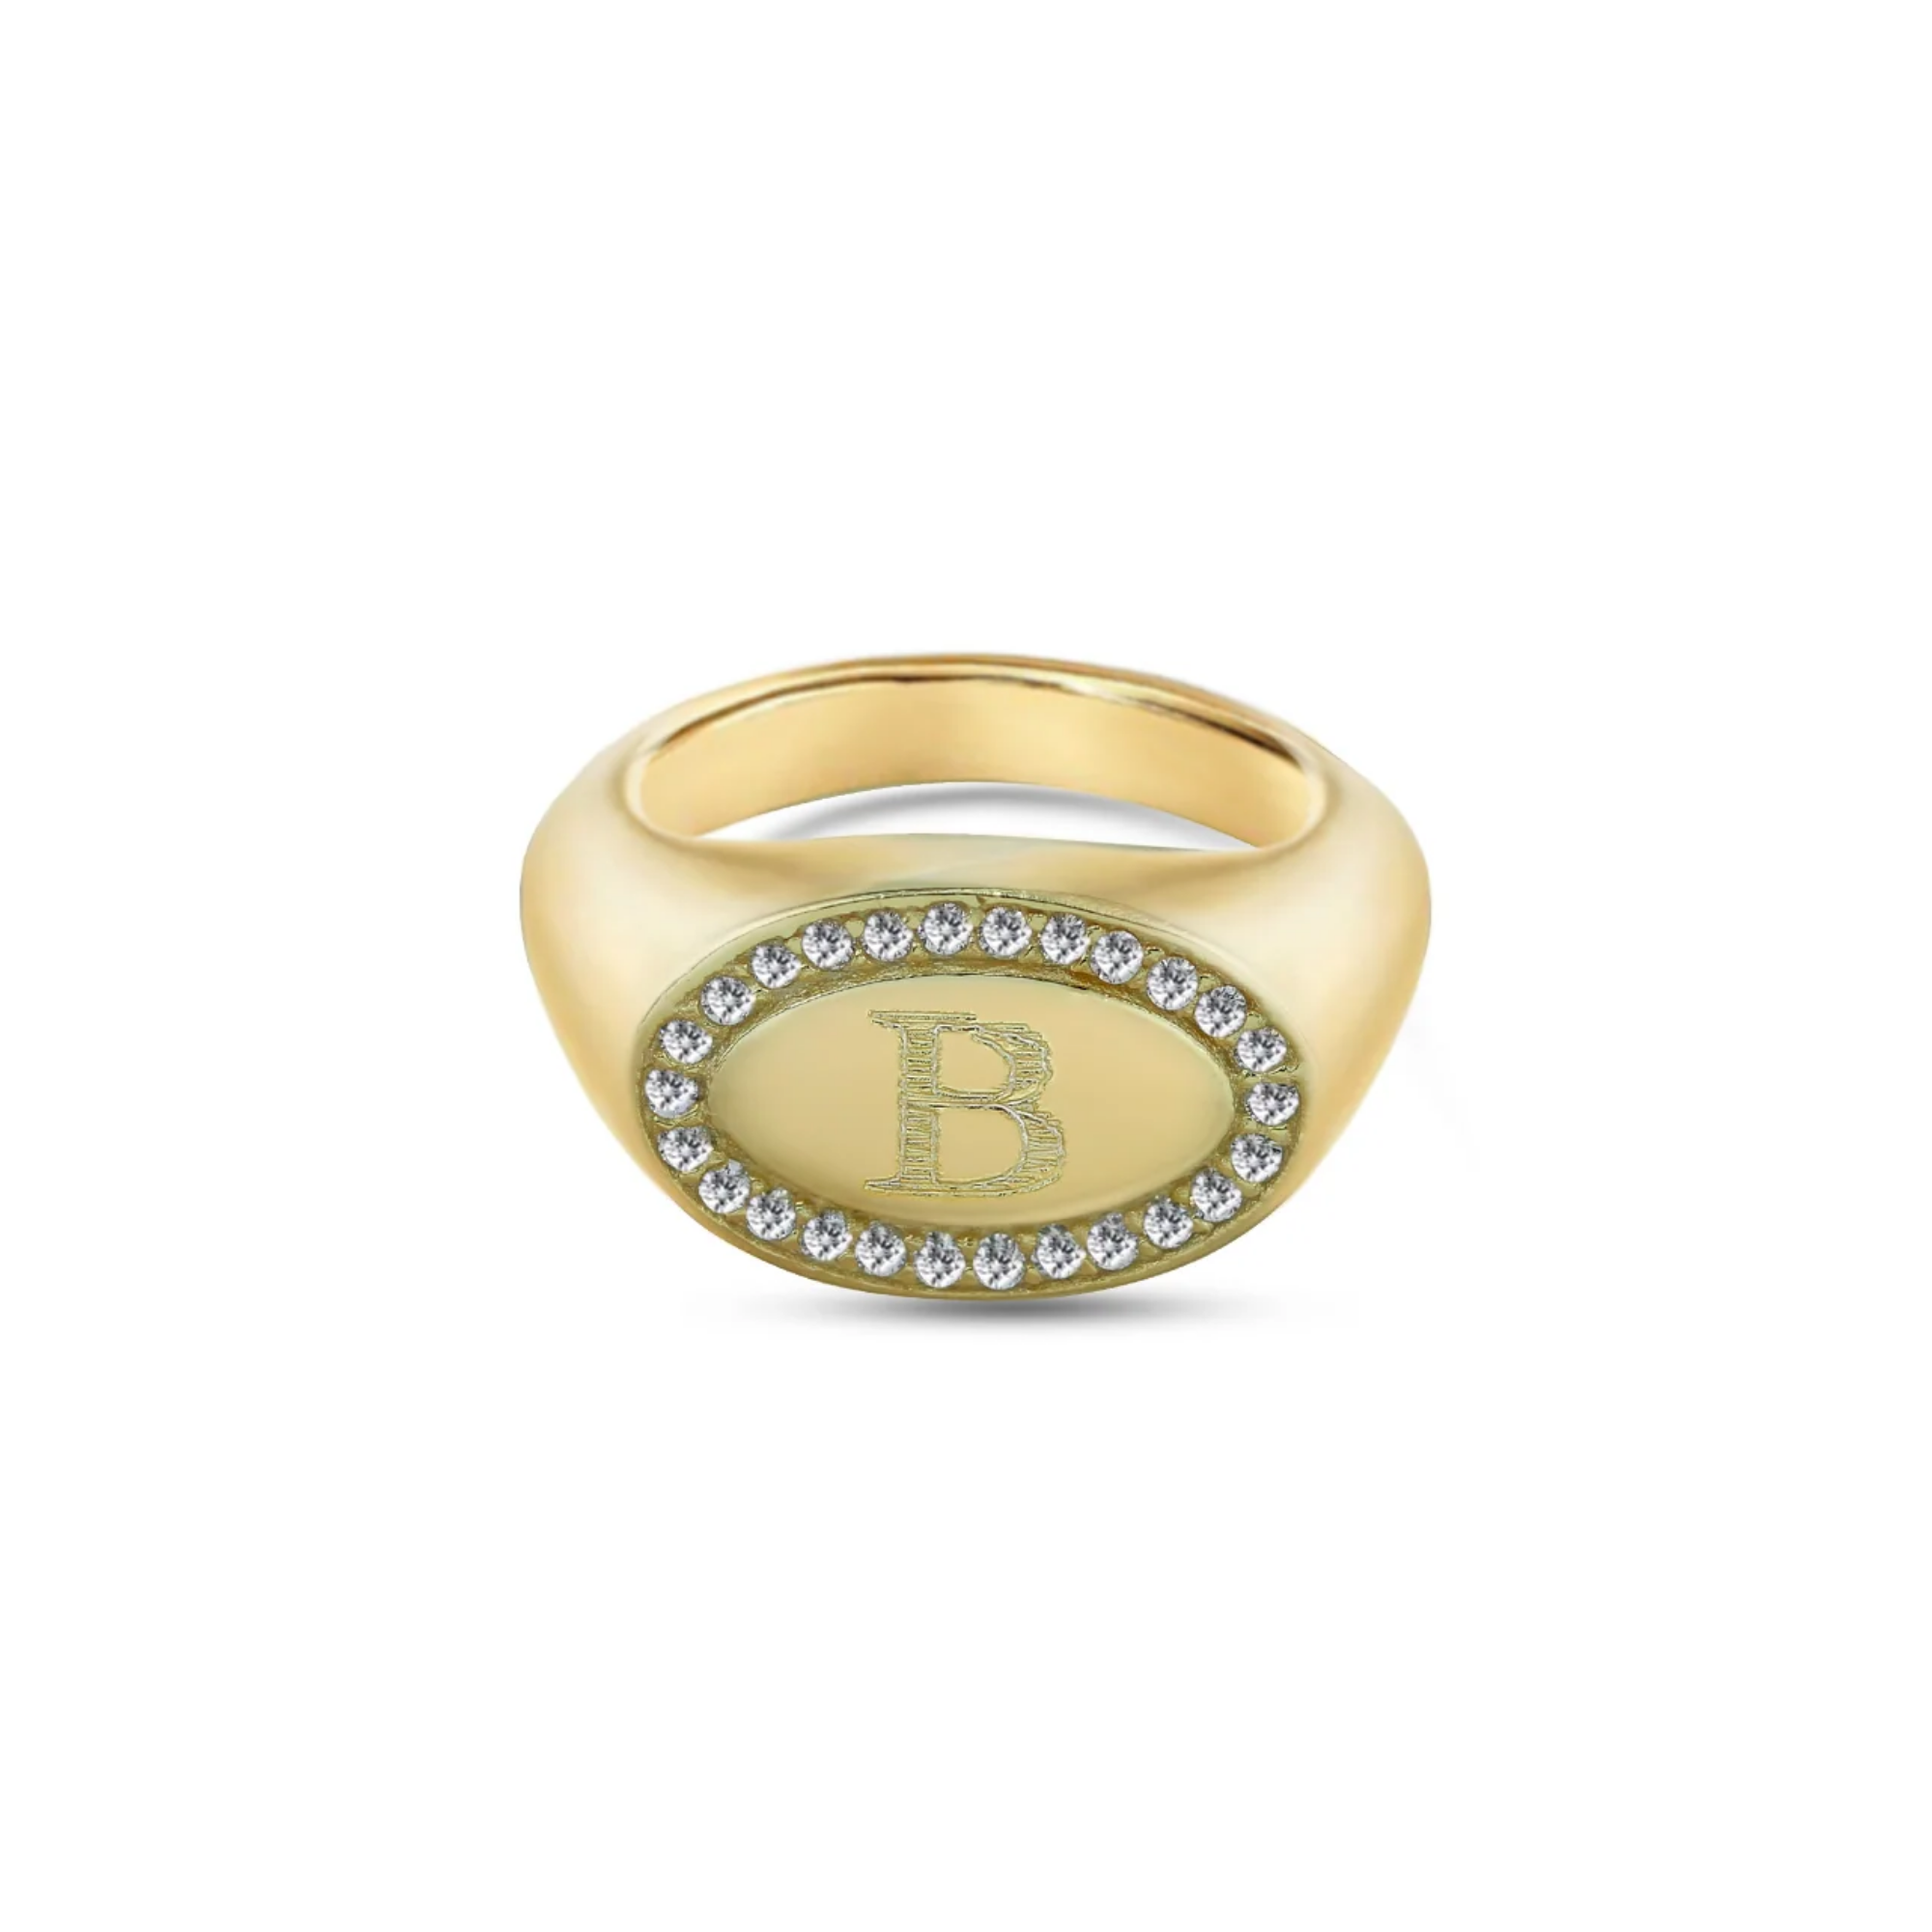 THE SIDE OVAL SIGNET RING